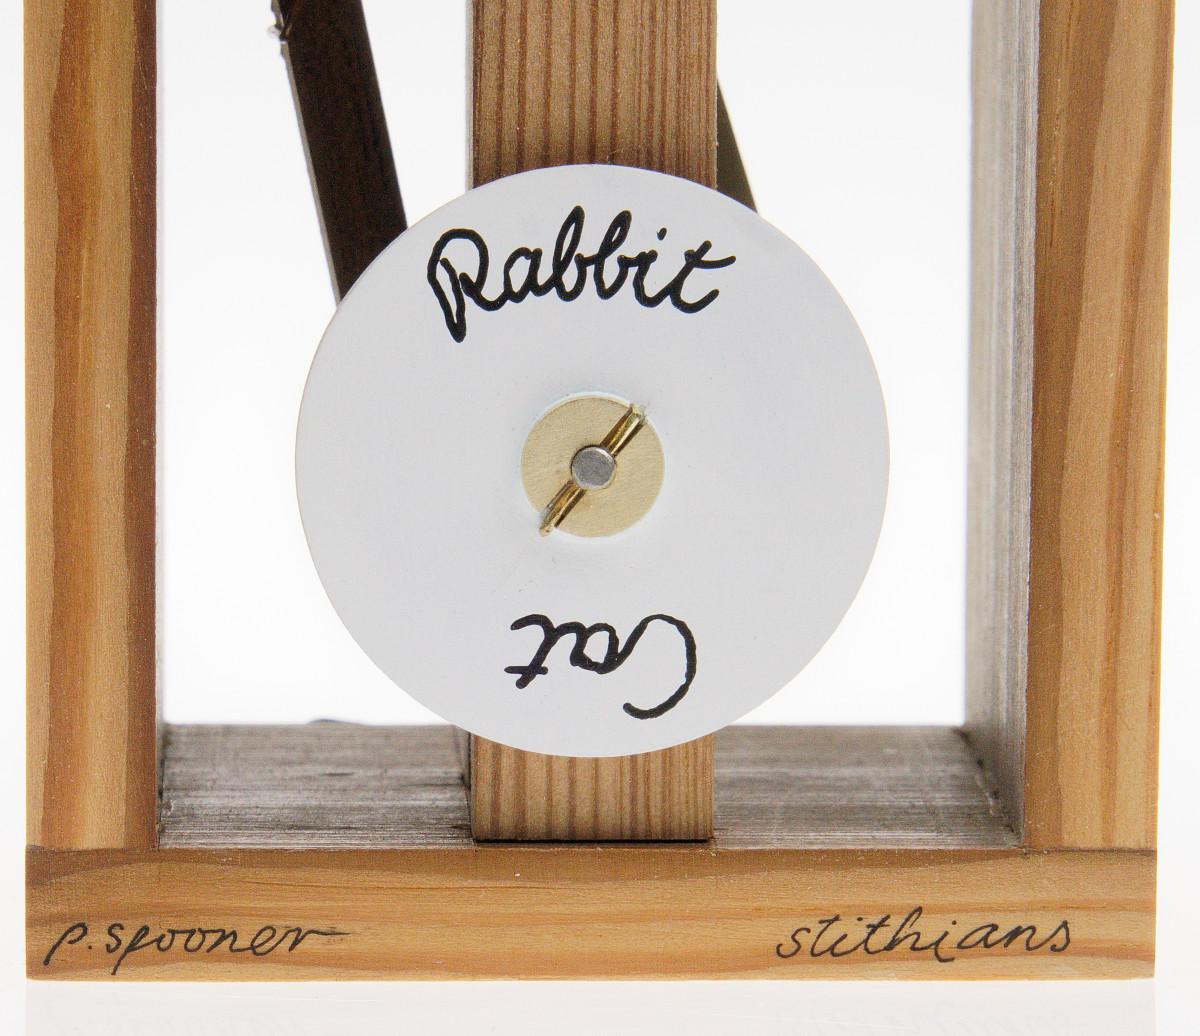 Wheel with Rabbit written at top and cat at bottom